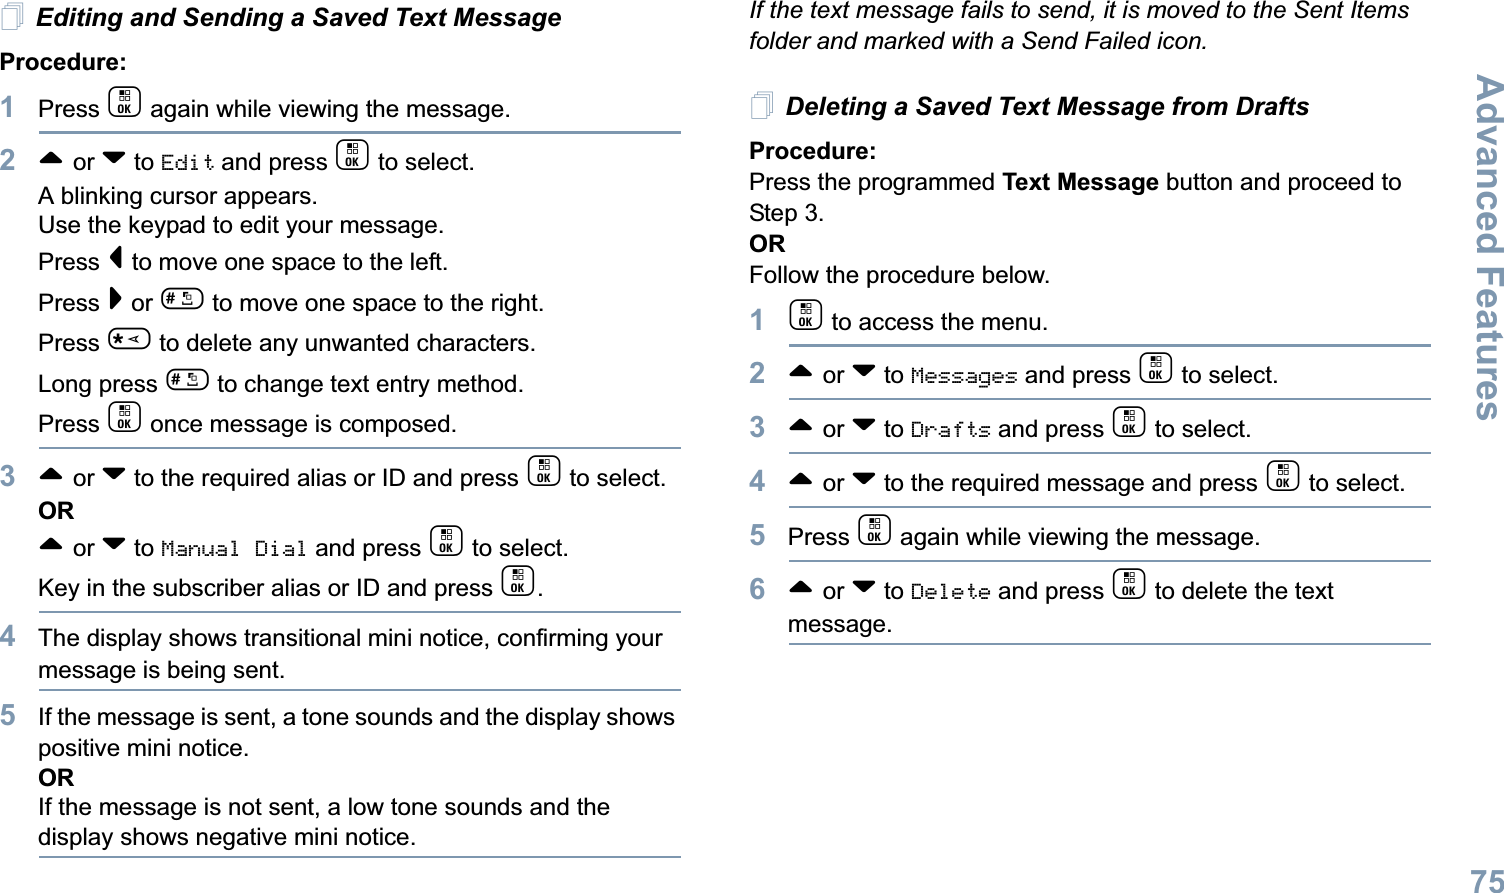 Advanced FeaturesEnglish75Editing and Sending a Saved Text MessageProcedure: 1Press c again while viewing the message.2^ or v to Edit and press c to select.A blinking cursor appears. Use the keypad to edit your message.Press &lt; to move one space to the left. Press &gt; or # to move one space to the right.Press * to delete any unwanted characters.Long press # to change text entry method.Press c once message is composed.3^ or v to the required alias or ID and press c to select.OR^ or v to Manual Dial and press c to select.  Key in the subscriber alias or ID and press c.4The display shows transitional mini notice, confirming your message is being sent.5If the message is sent, a tone sounds and the display shows positive mini notice.ORIf the message is not sent, a low tone sounds and the display shows negative mini notice.If the text message fails to send, it is moved to the Sent Items folder and marked with a Send Failed icon.Deleting a Saved Text Message from DraftsProcedure:Press the programmed Text Message button and proceed to Step 3.ORFollow the procedure below.1c to access the menu.2^ or v to Messages and press c to select.3^ or v to Drafts and press c to select.4^ or v to the required message and press c to select.5Press c again while viewing the message.6^ or v to Delete and press c to delete the text message.